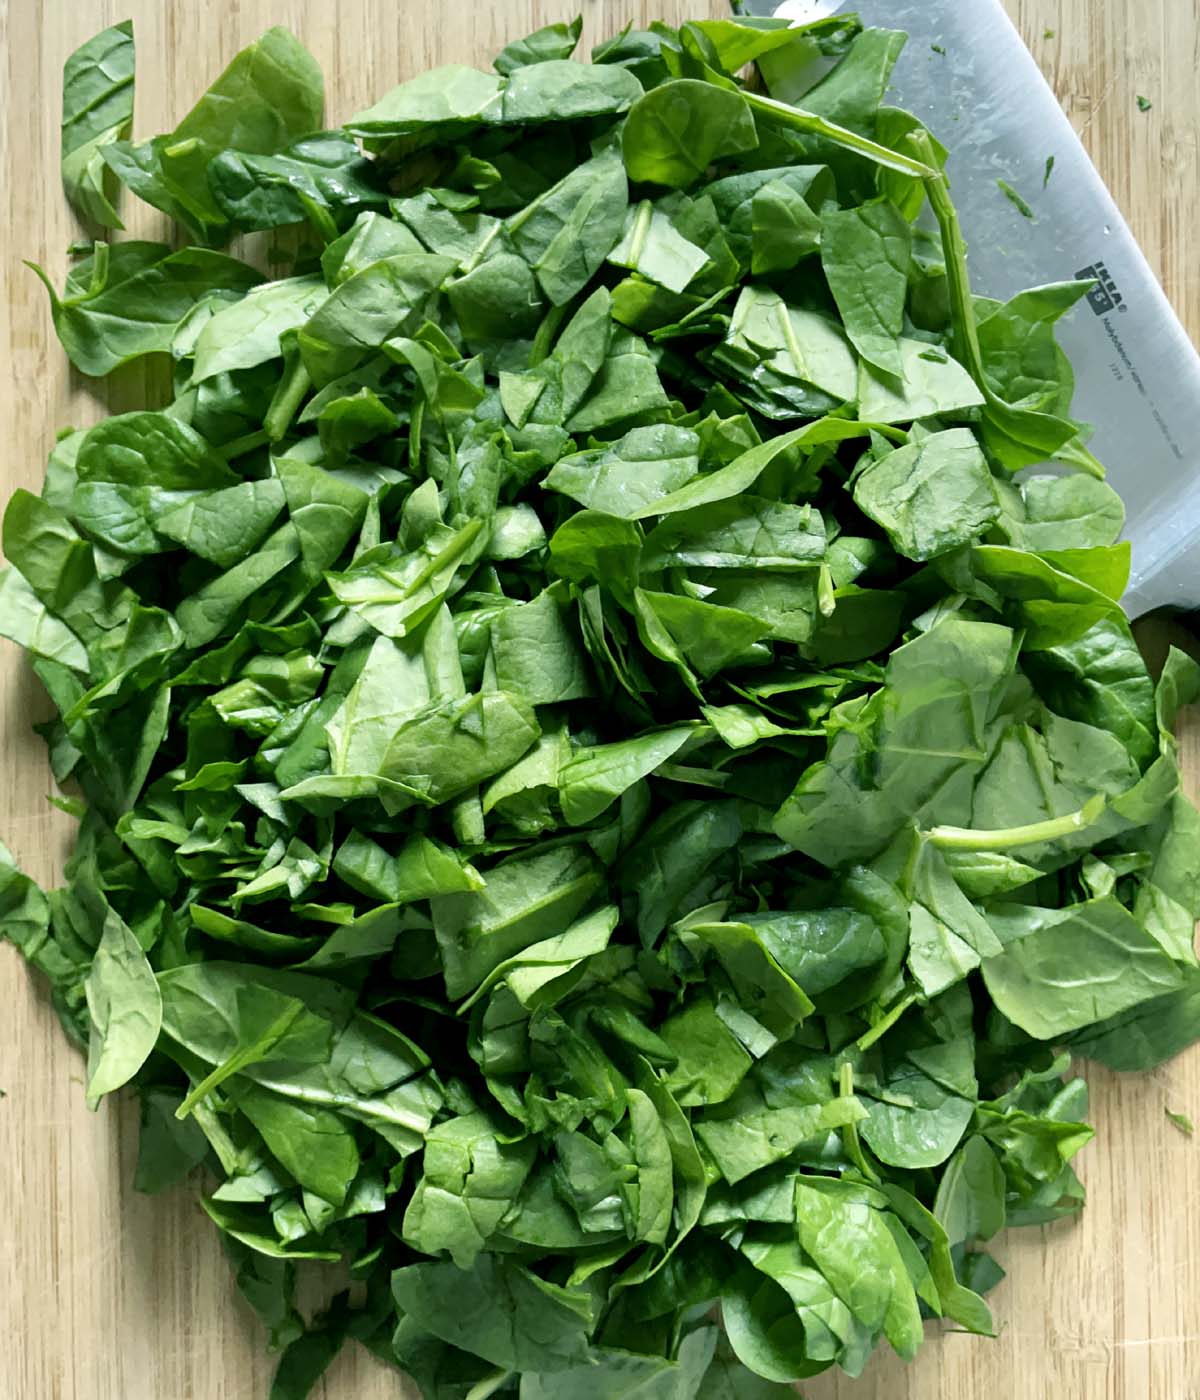 A knife and chopped green spinach on a wooden cutting board.